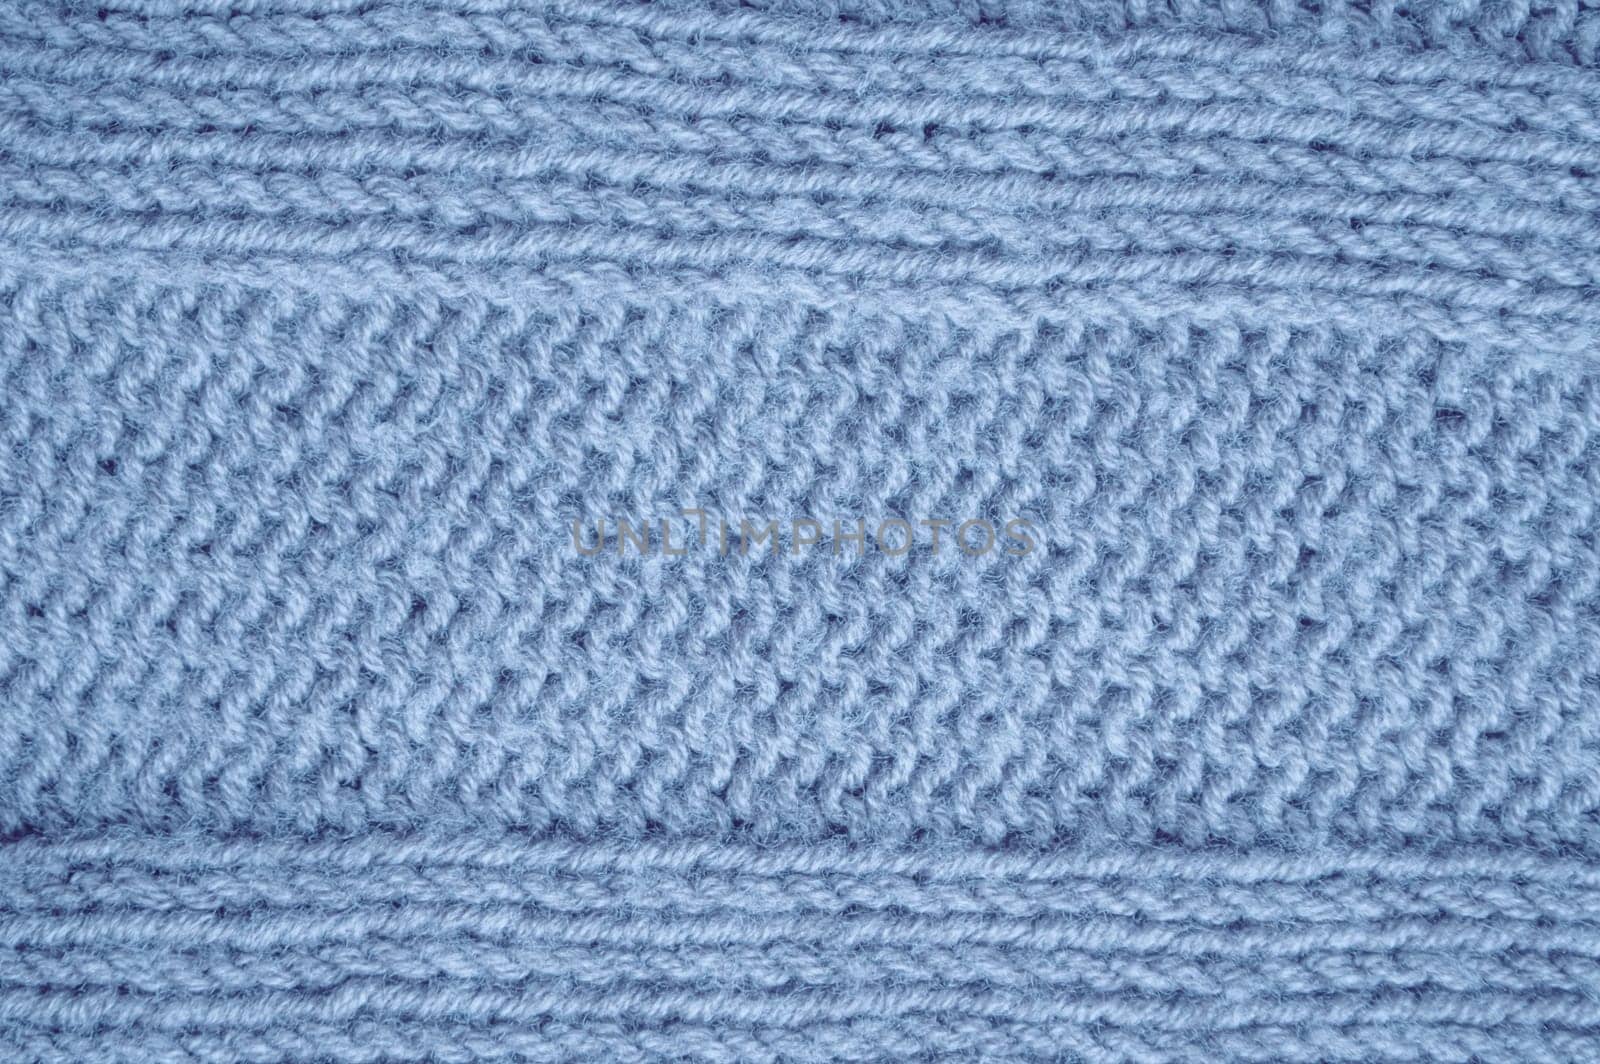 Structure Knitted Sweater. Abstract Wool Texture. Handmade Xmas Background. Knitted Blanket. Blue Macro Thread. Scandinavian Winter Plaid. Fiber Jumper Cashmere. Detail Knitted Sweater.